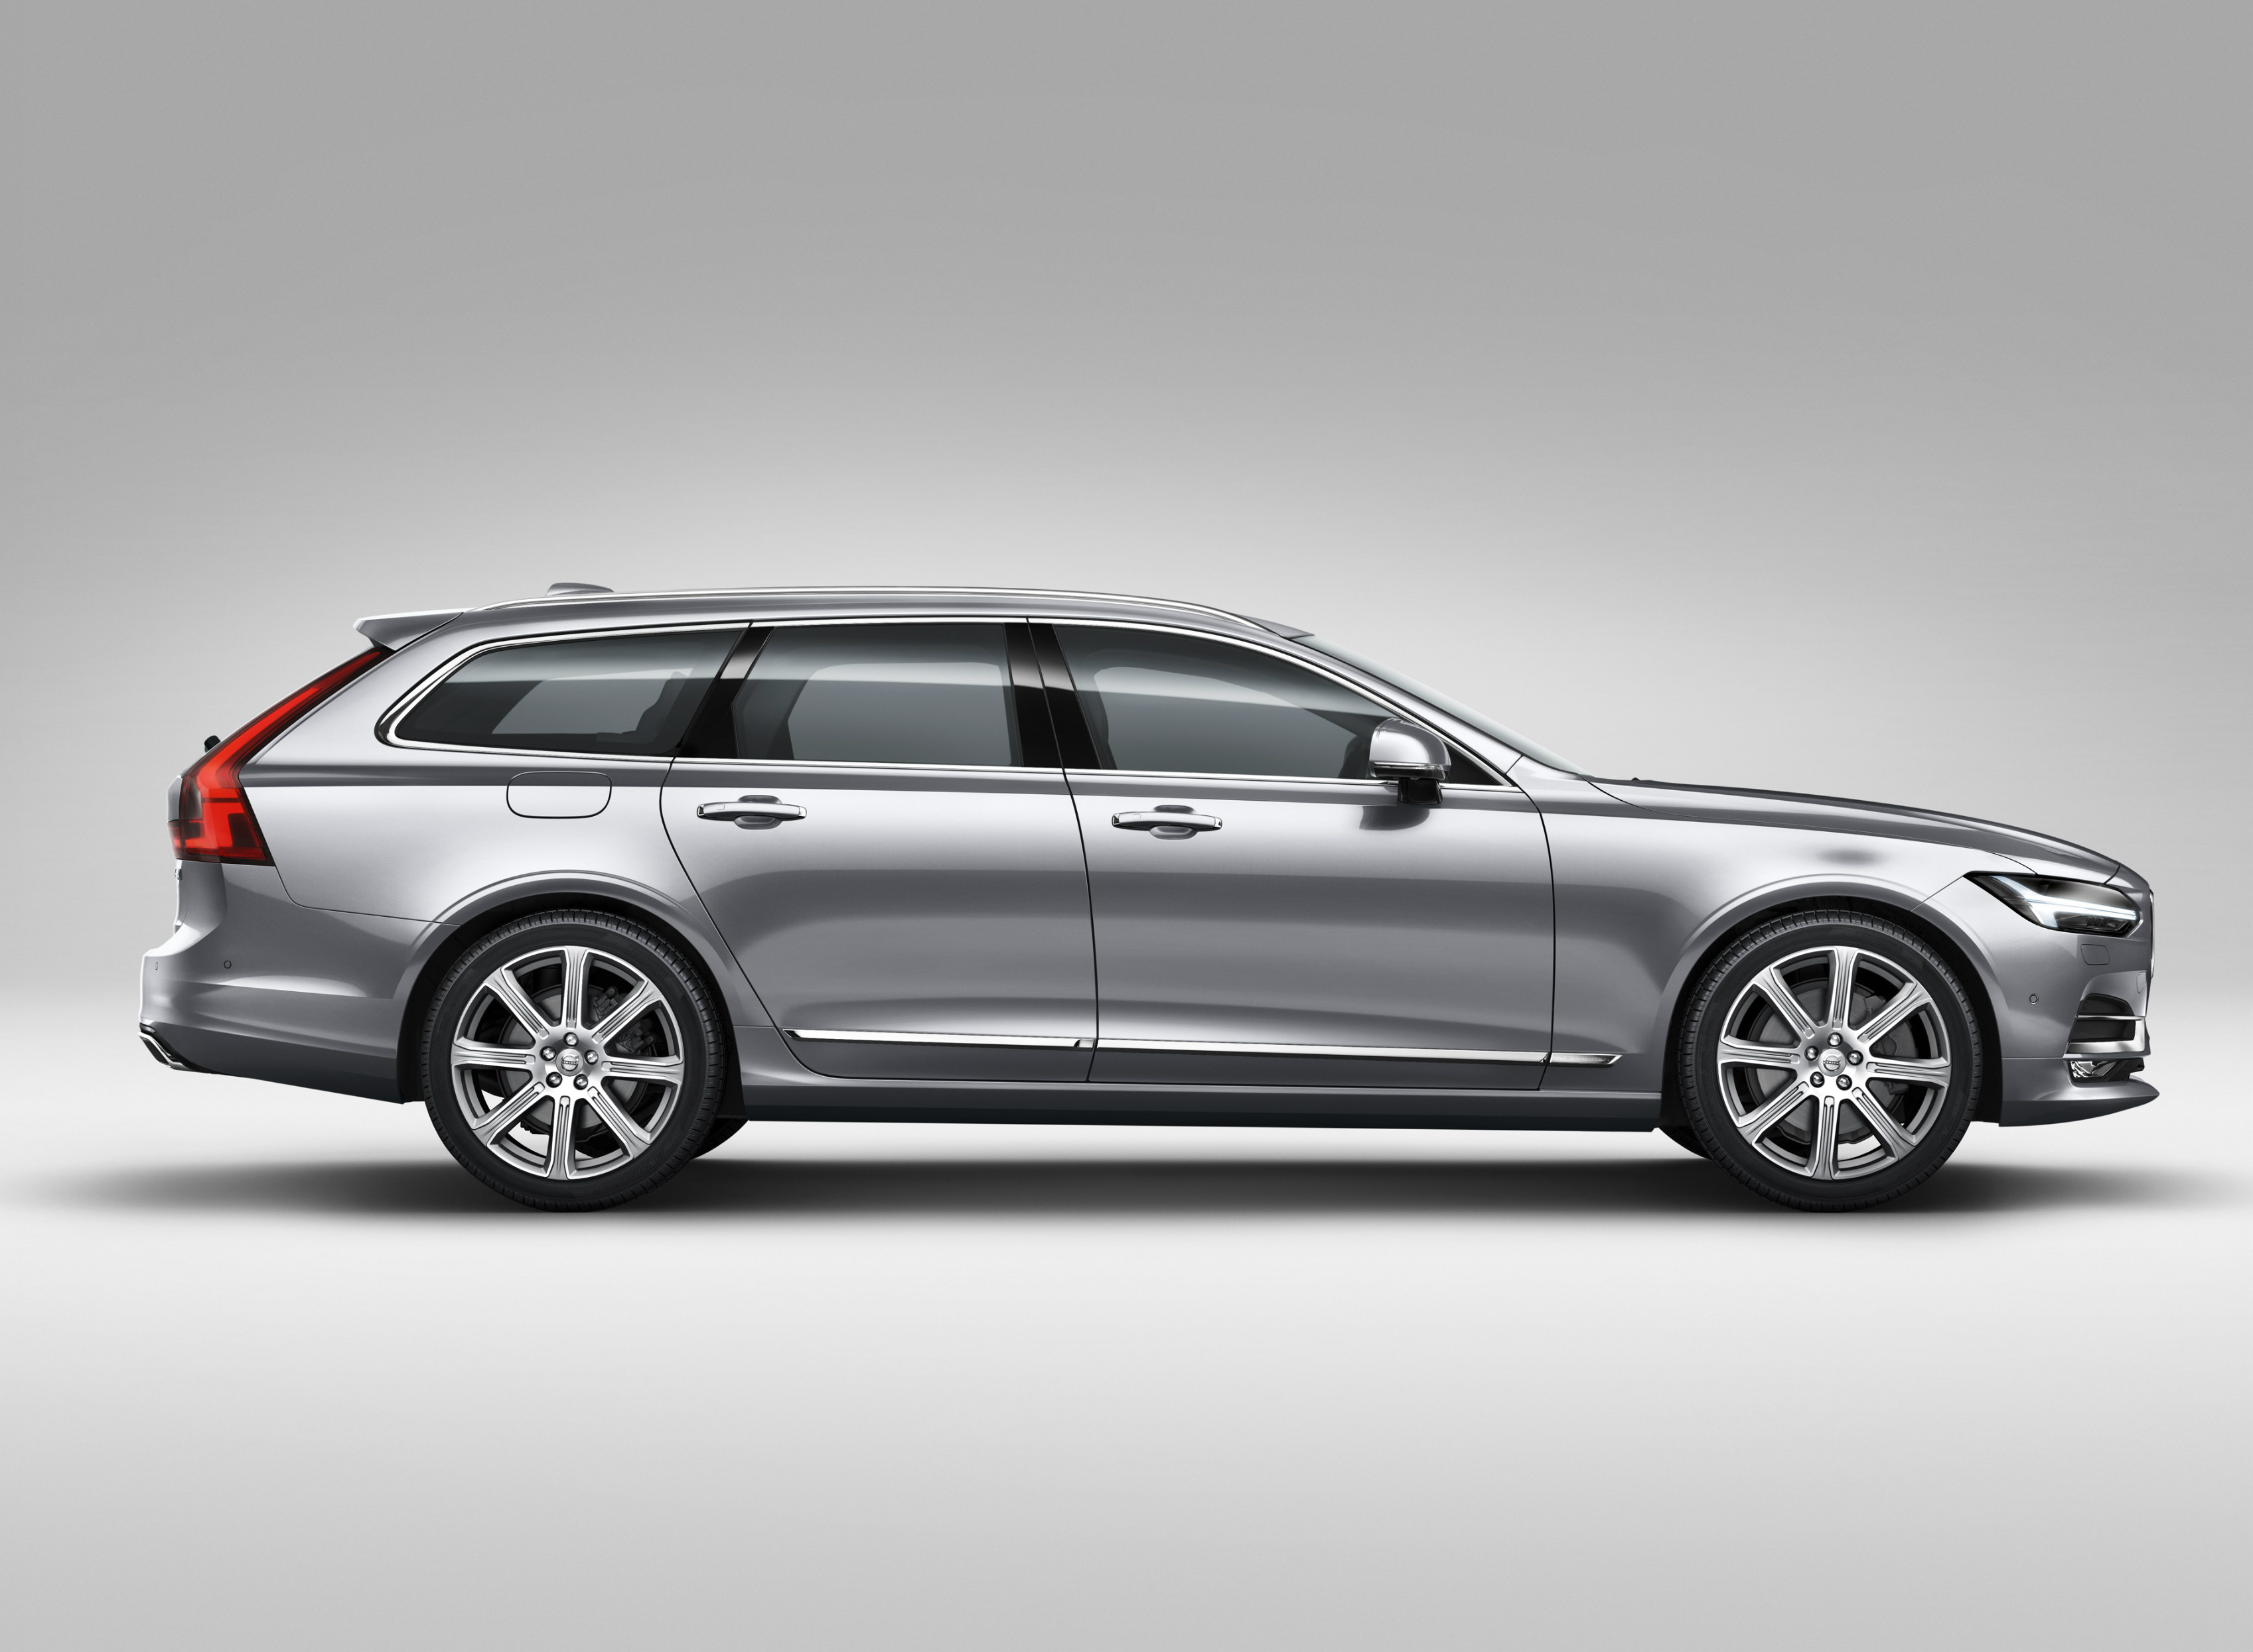 First pictures and details of the 2016 Volvo V90 large estate car